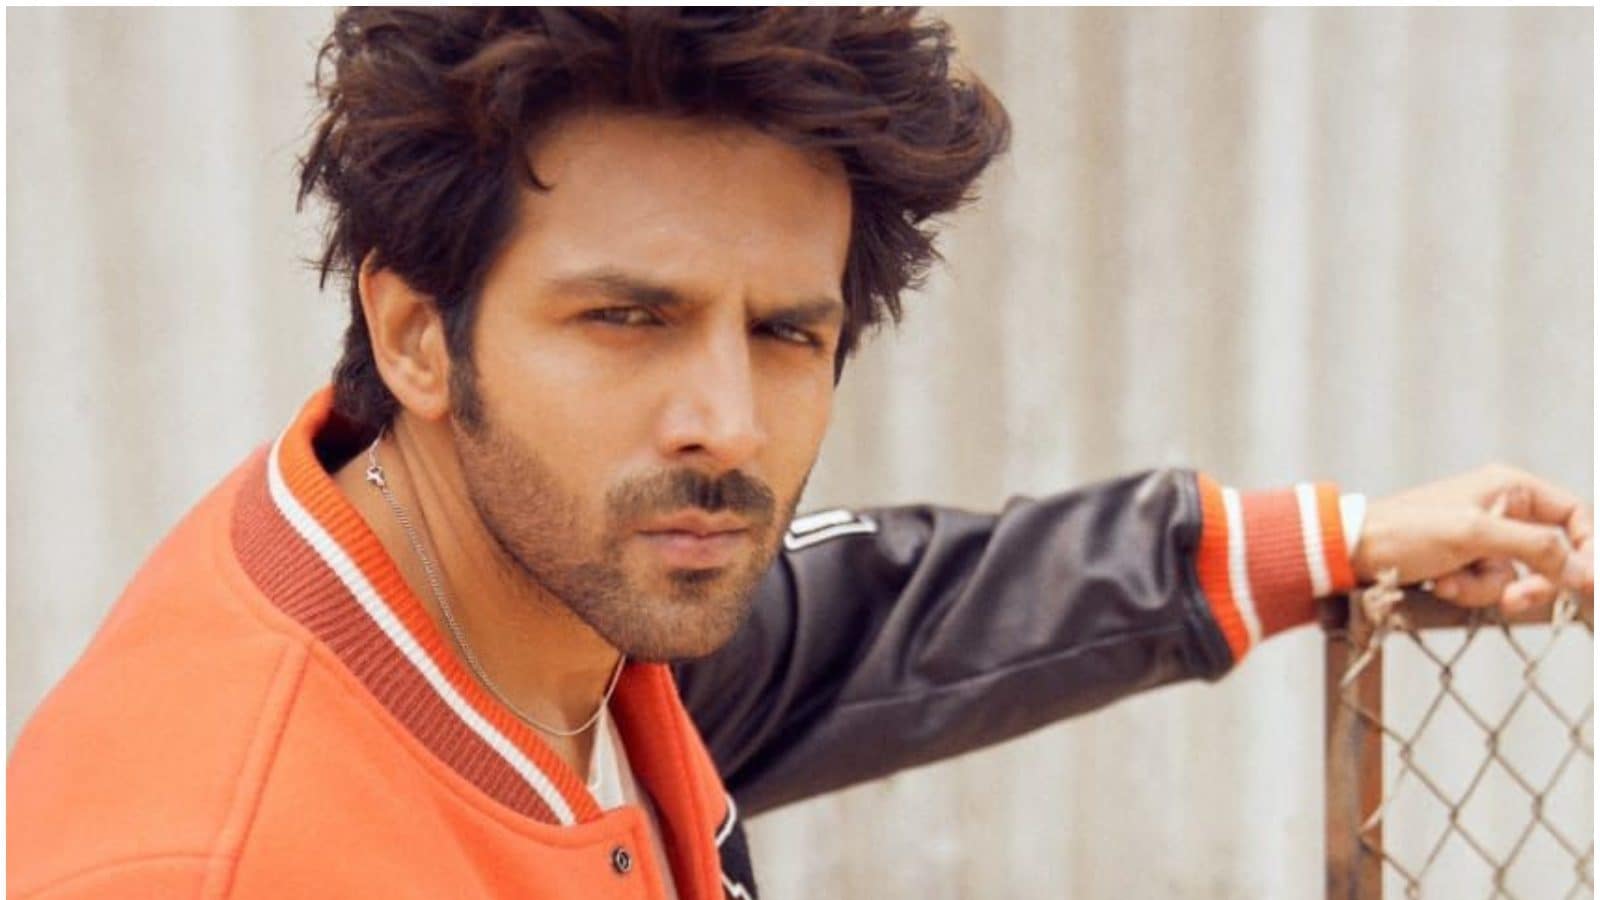 Kartik Aaryan Says He Wants to Meet His Fans and 'Have One-on-One Conversations with Them'